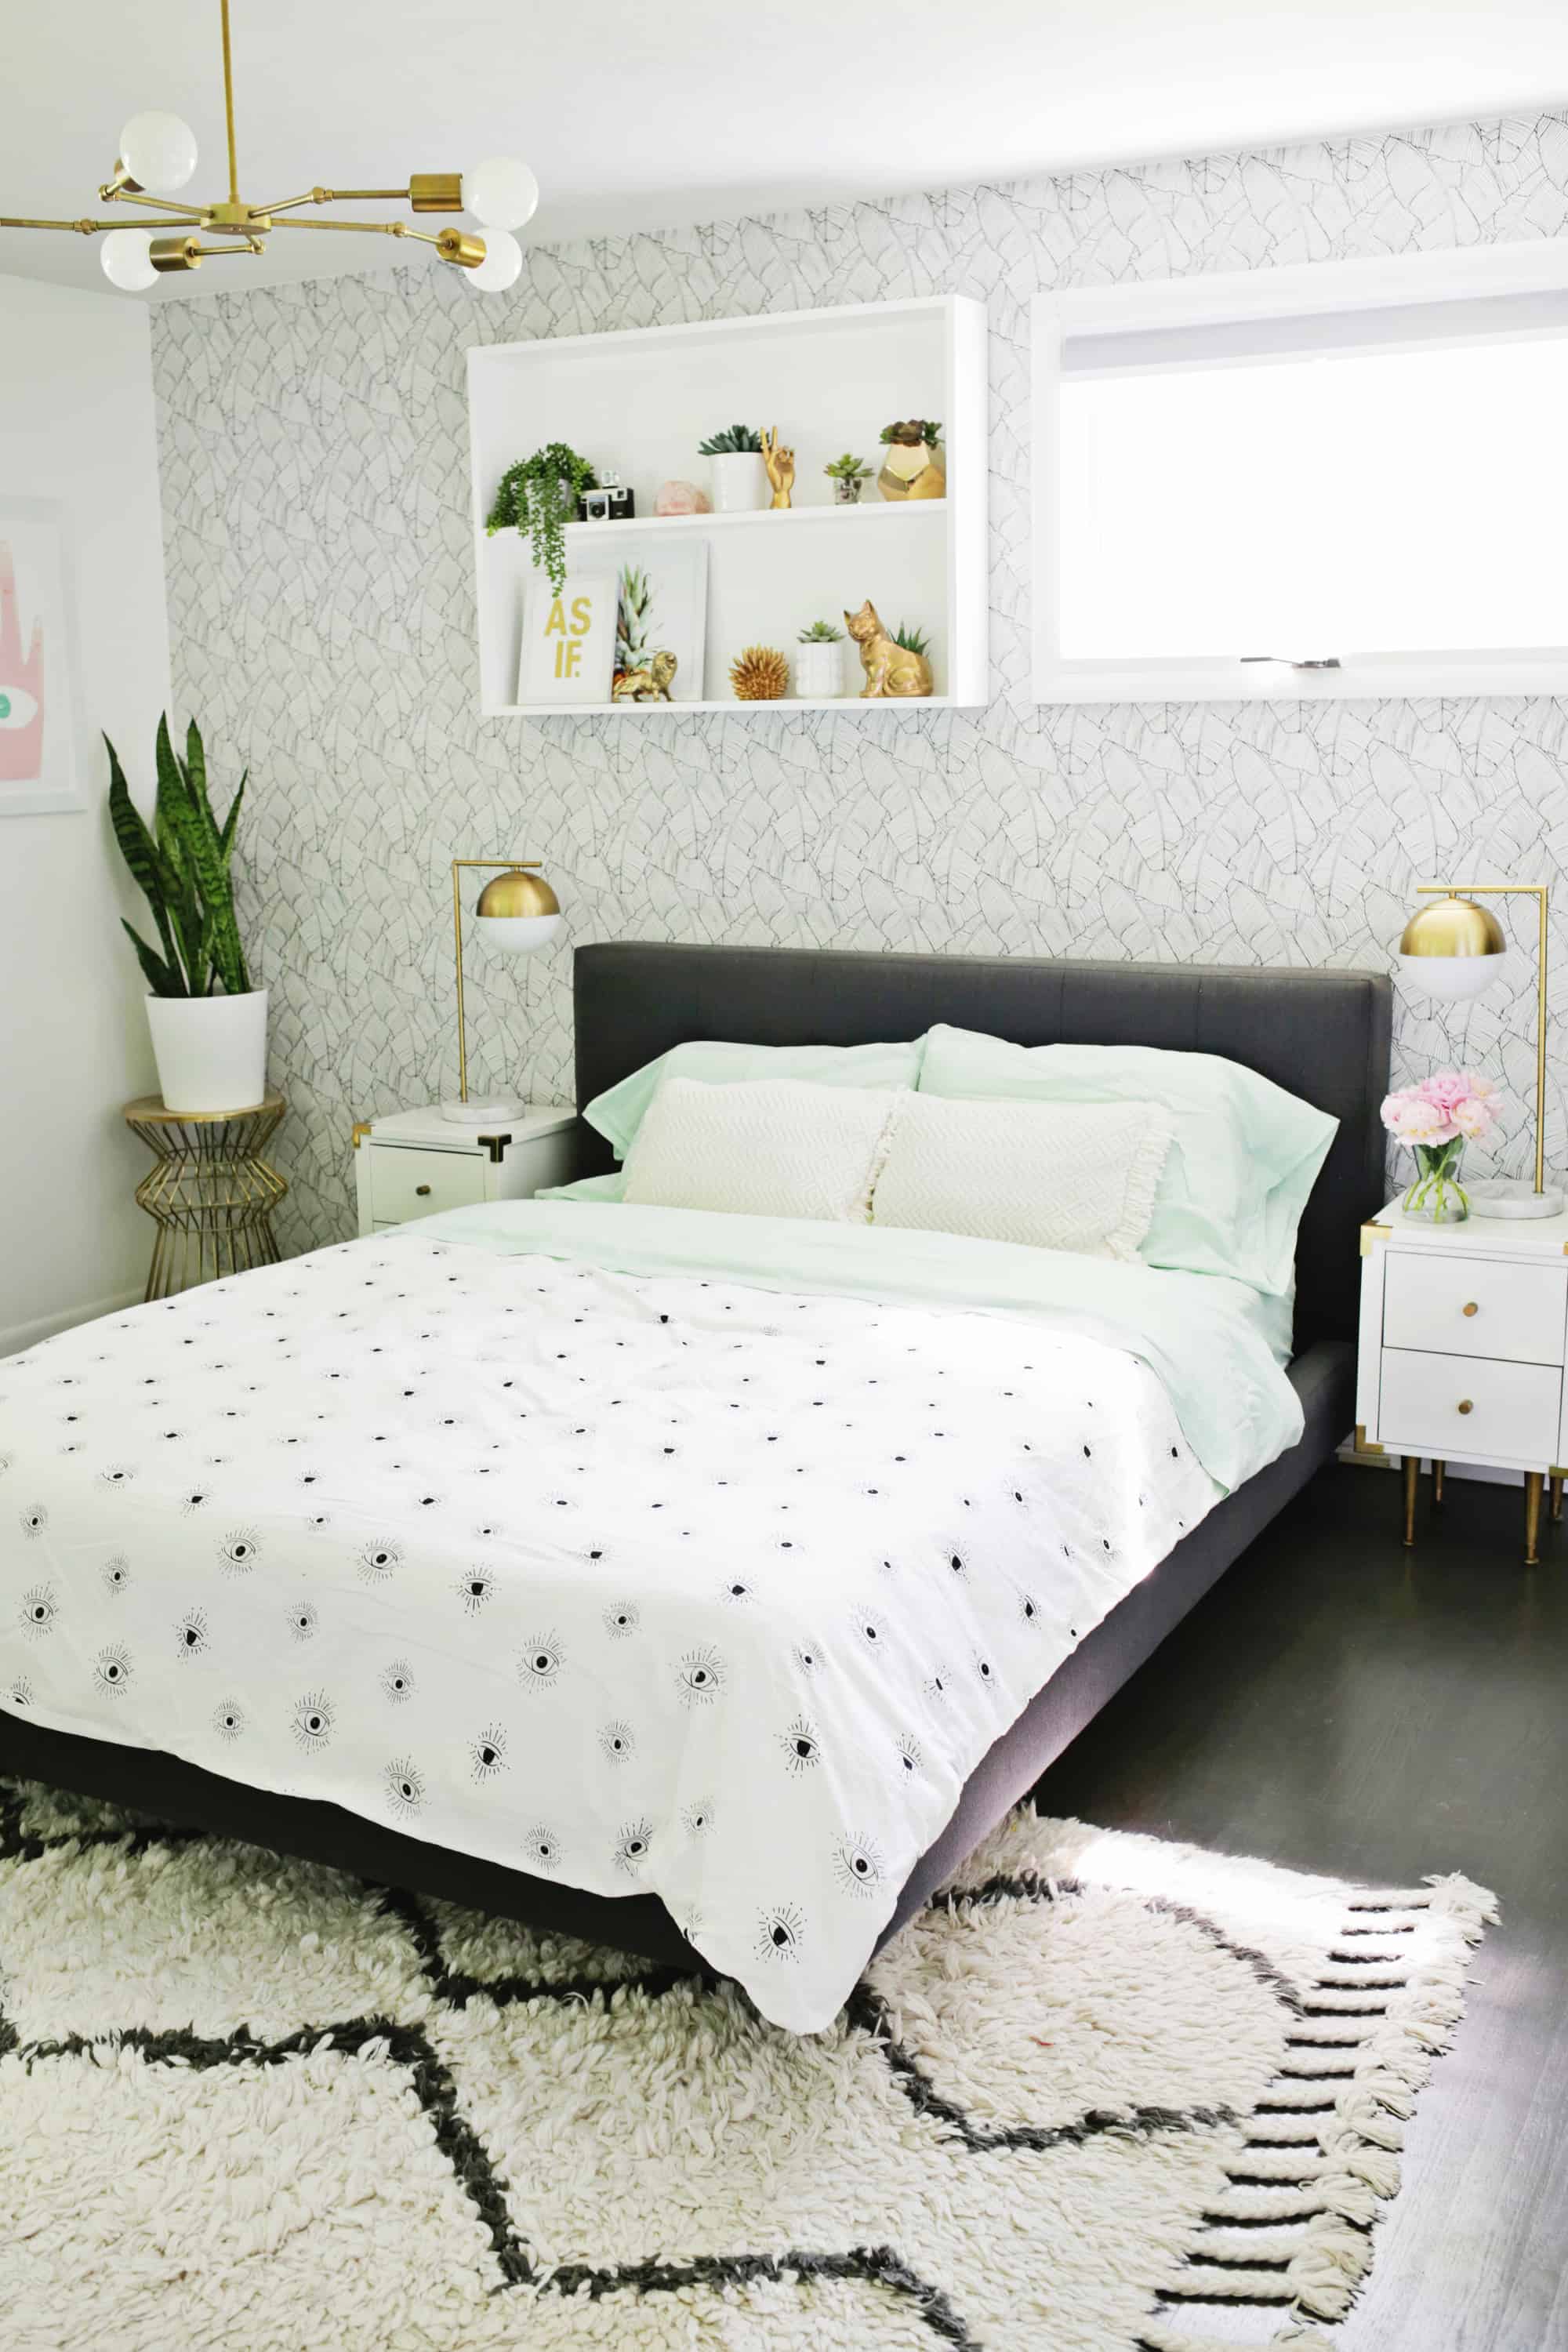 Easy Duvet Cover With Any Flat Sheet, Can A Duvet Cover Go Over A Regular Comforter